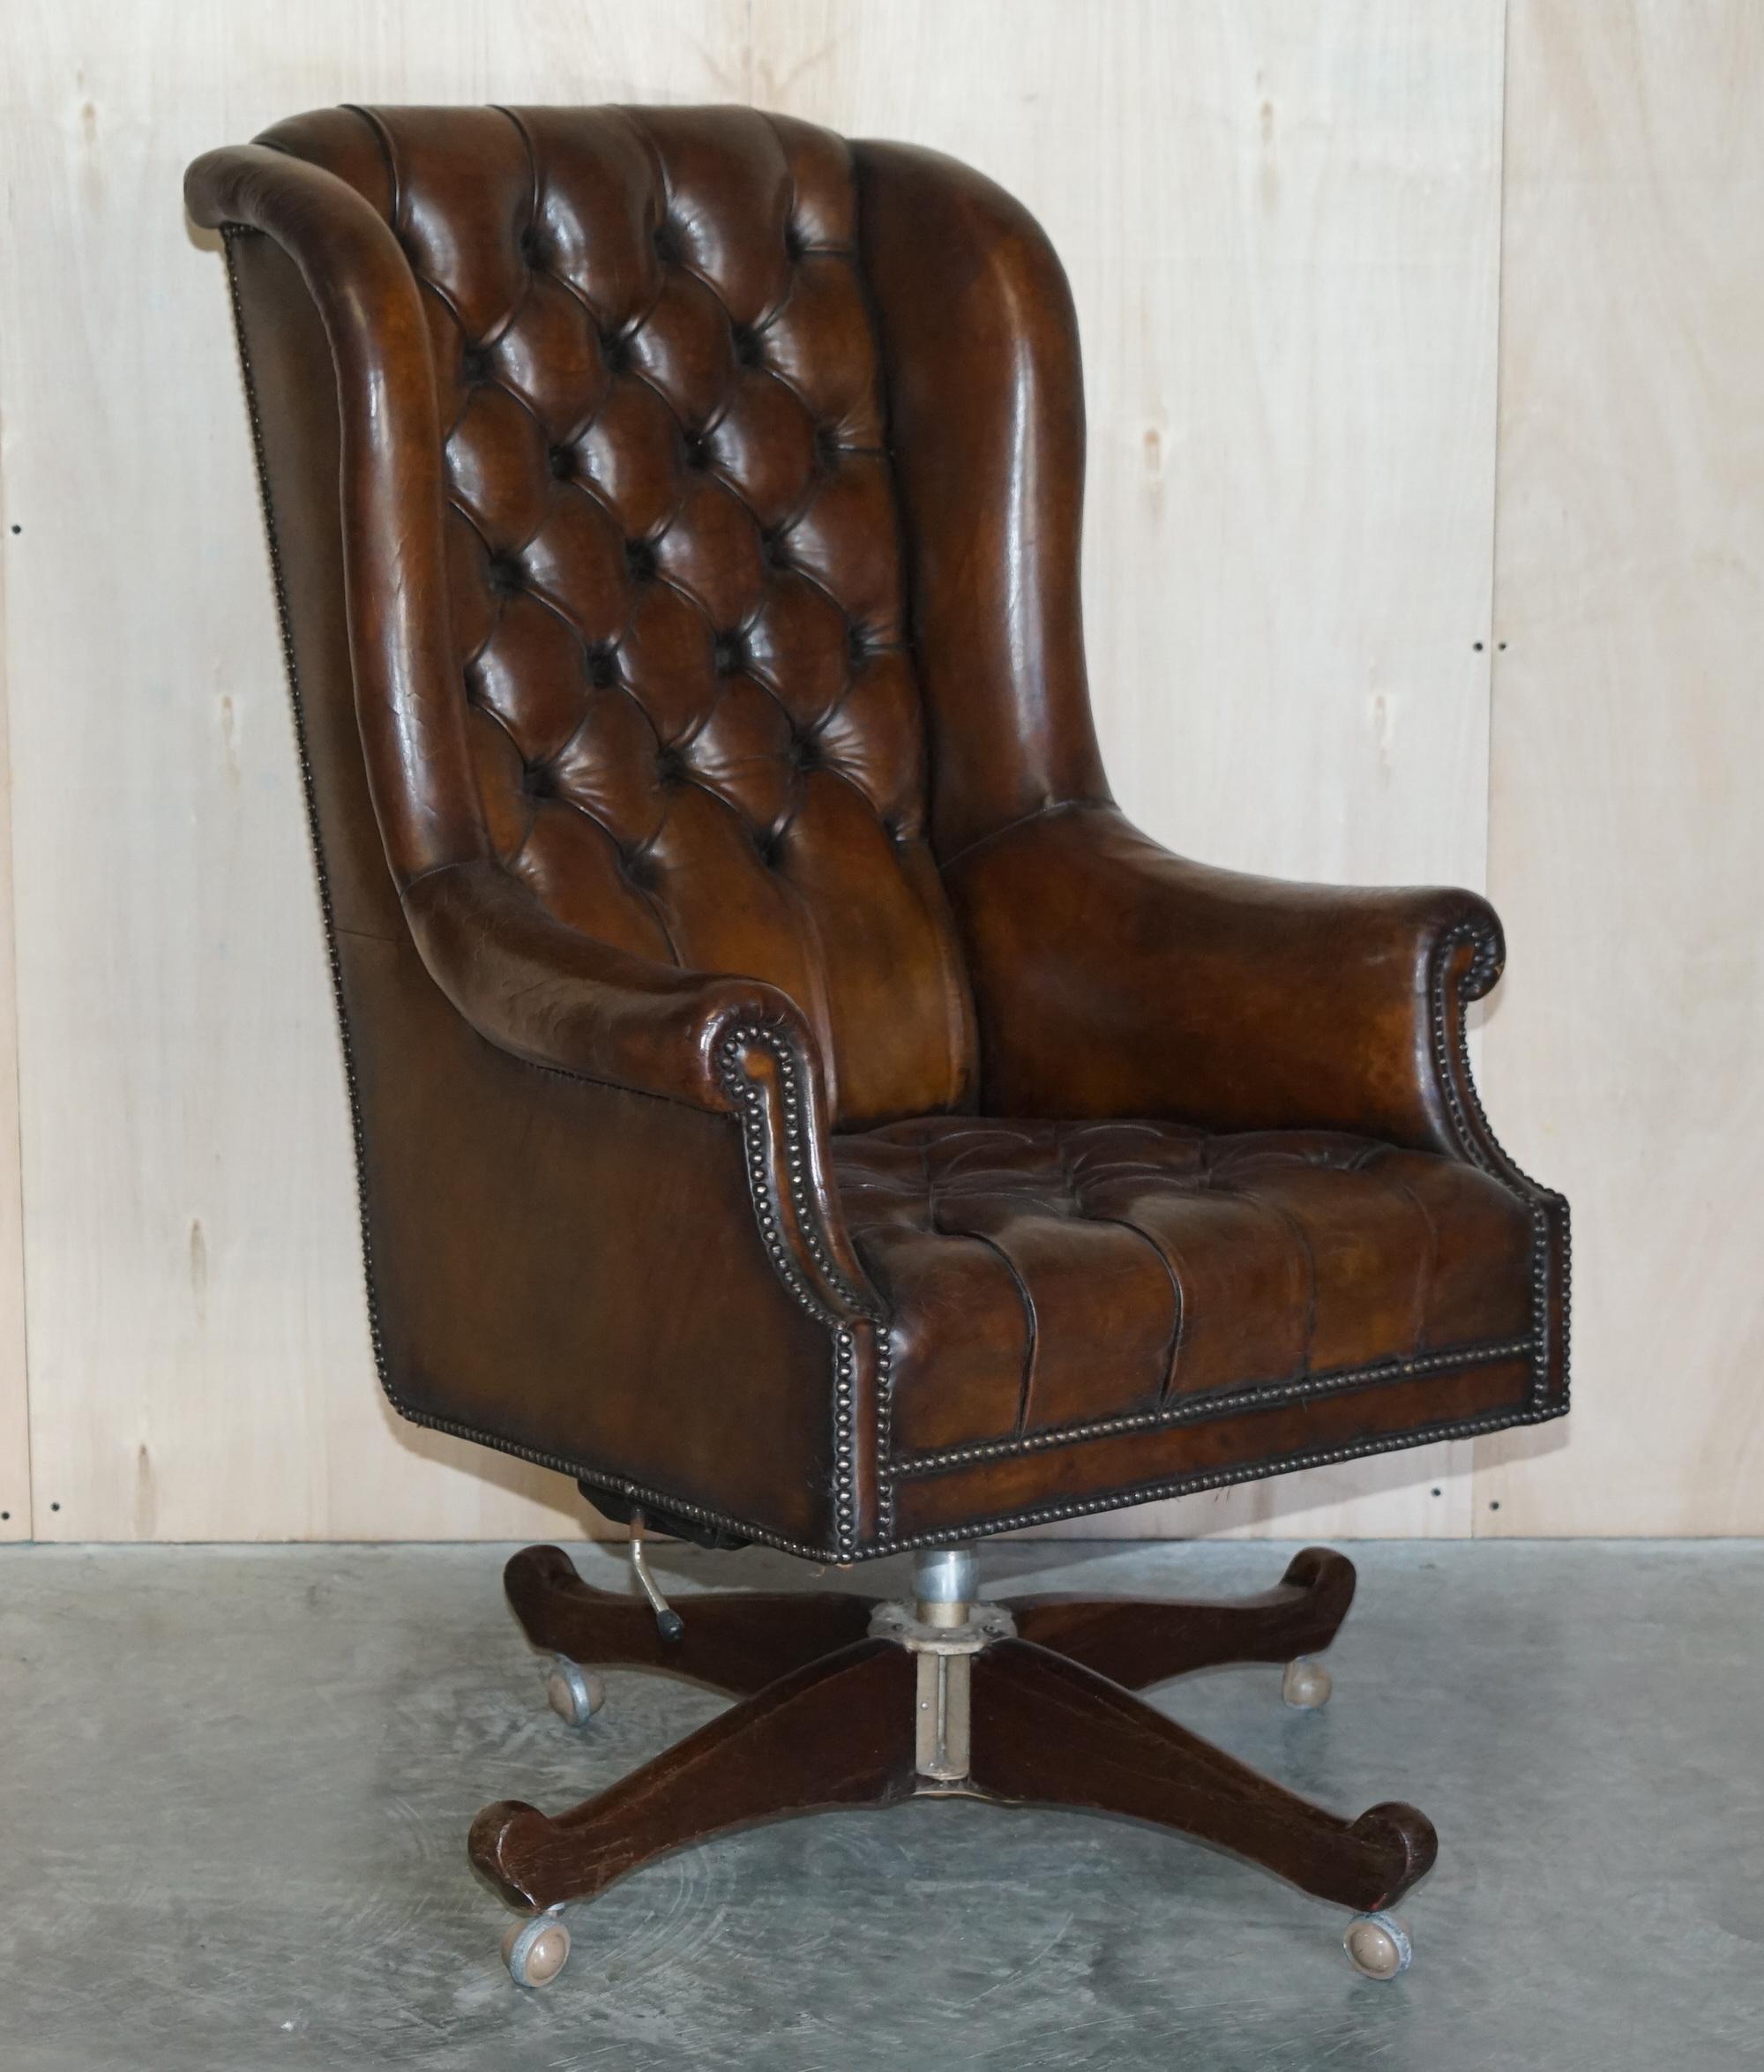 We are delighted to offer for sale this stunning fully restored circa 1900 hand dyed deep cigar leather very large Chesterfield Wingback office chair with original leather and patina 

This is a very comfortable captain’s indeed, it’s like your